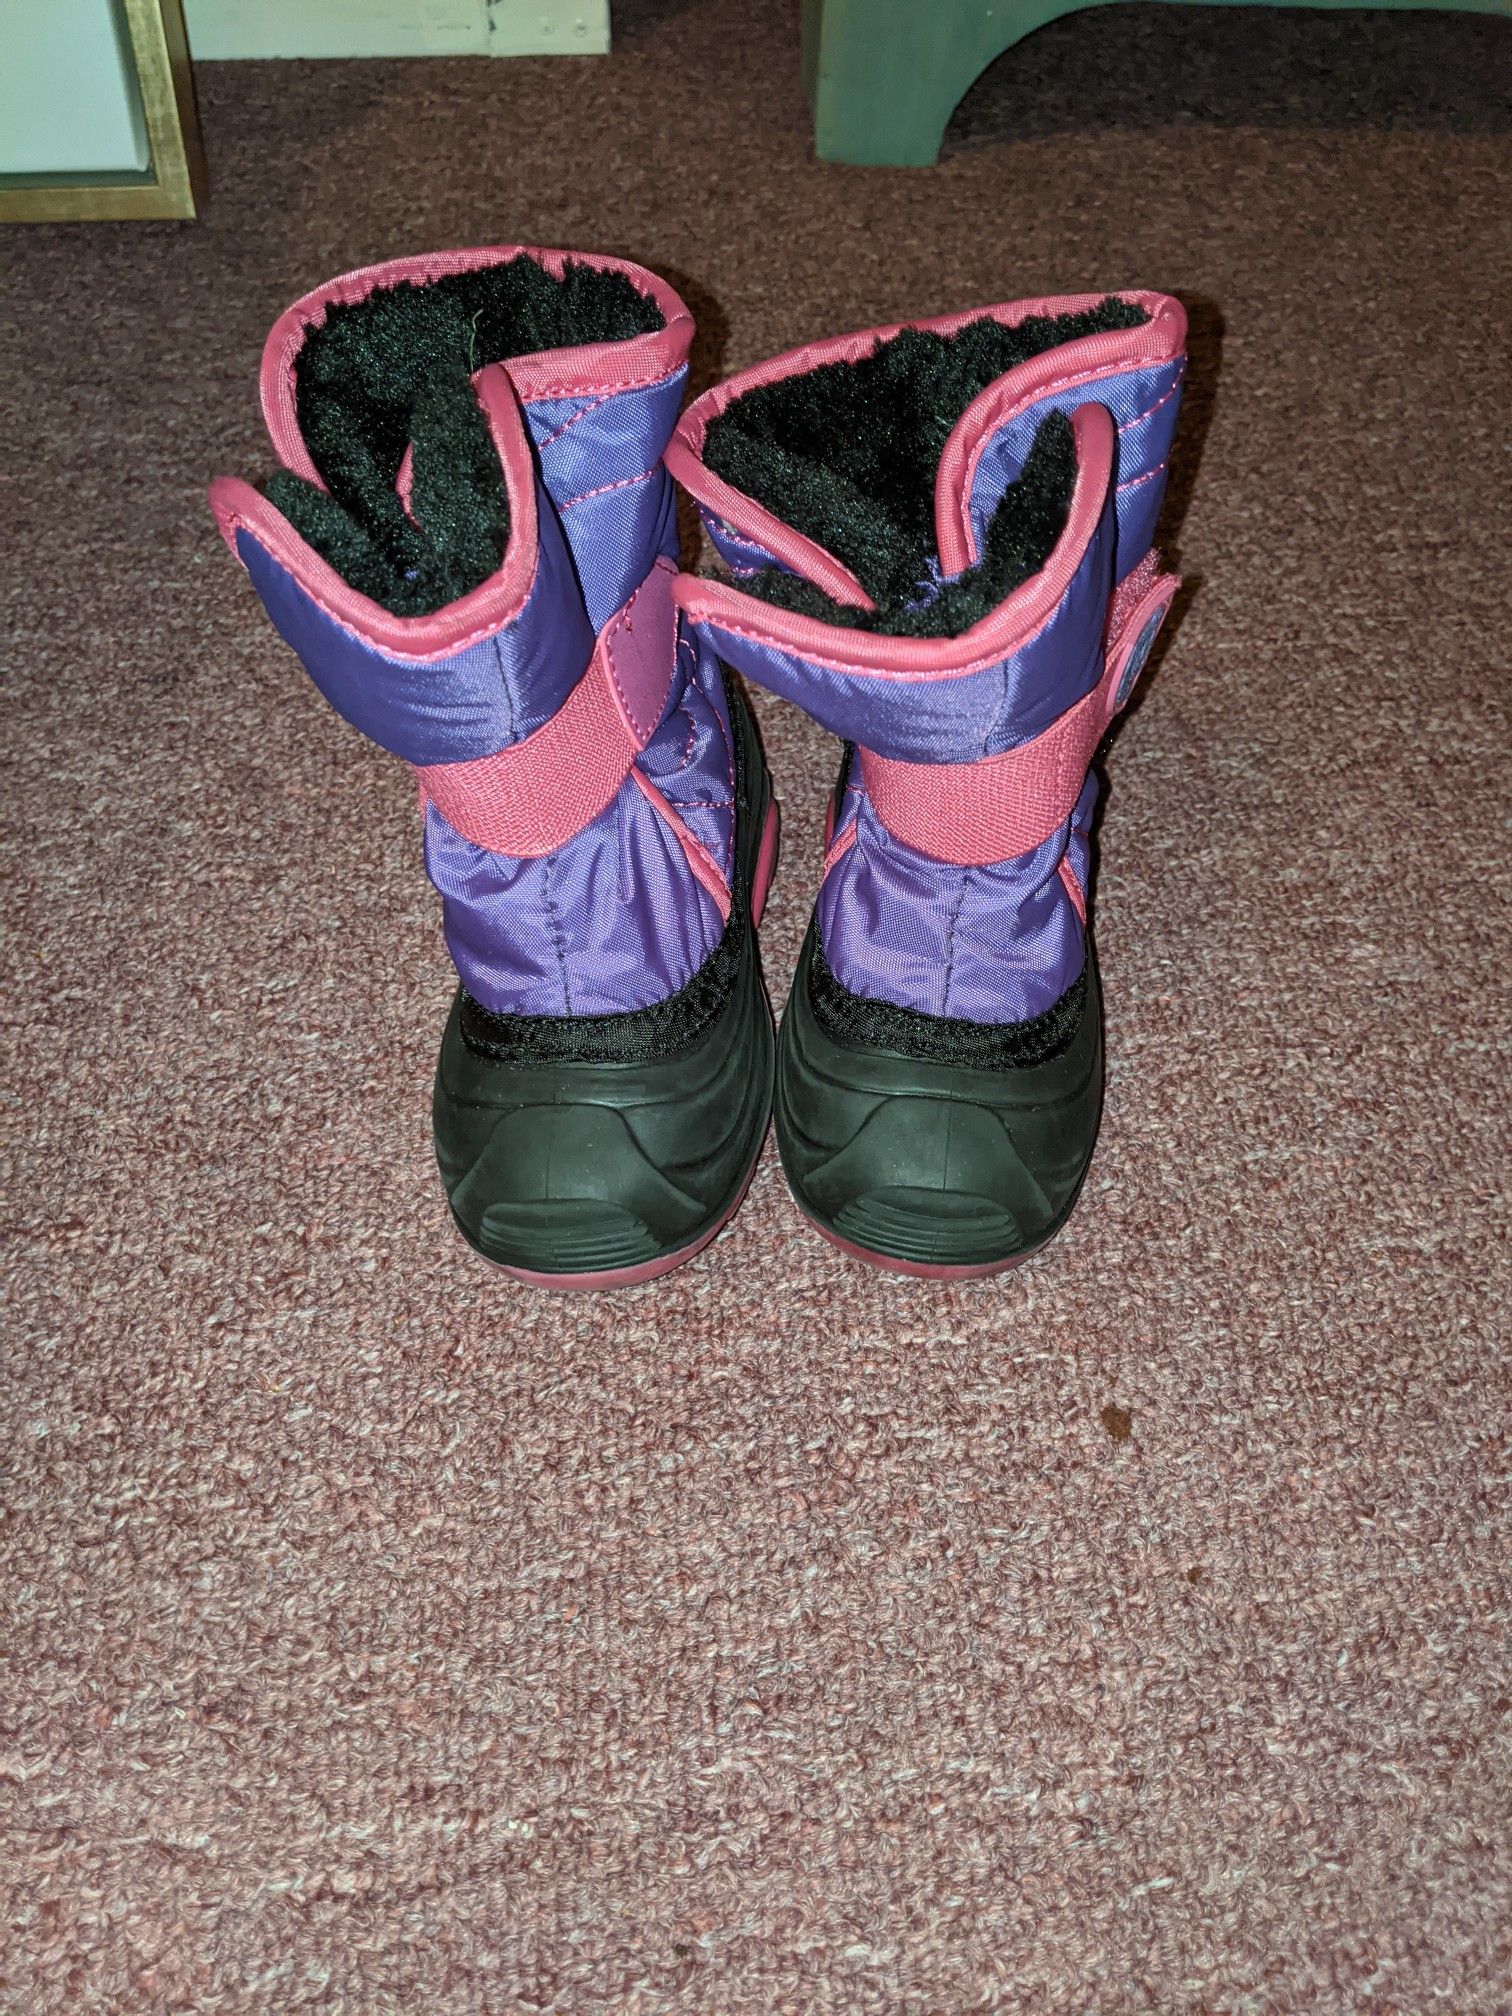 Toddler Girl Fall/Winter Boots